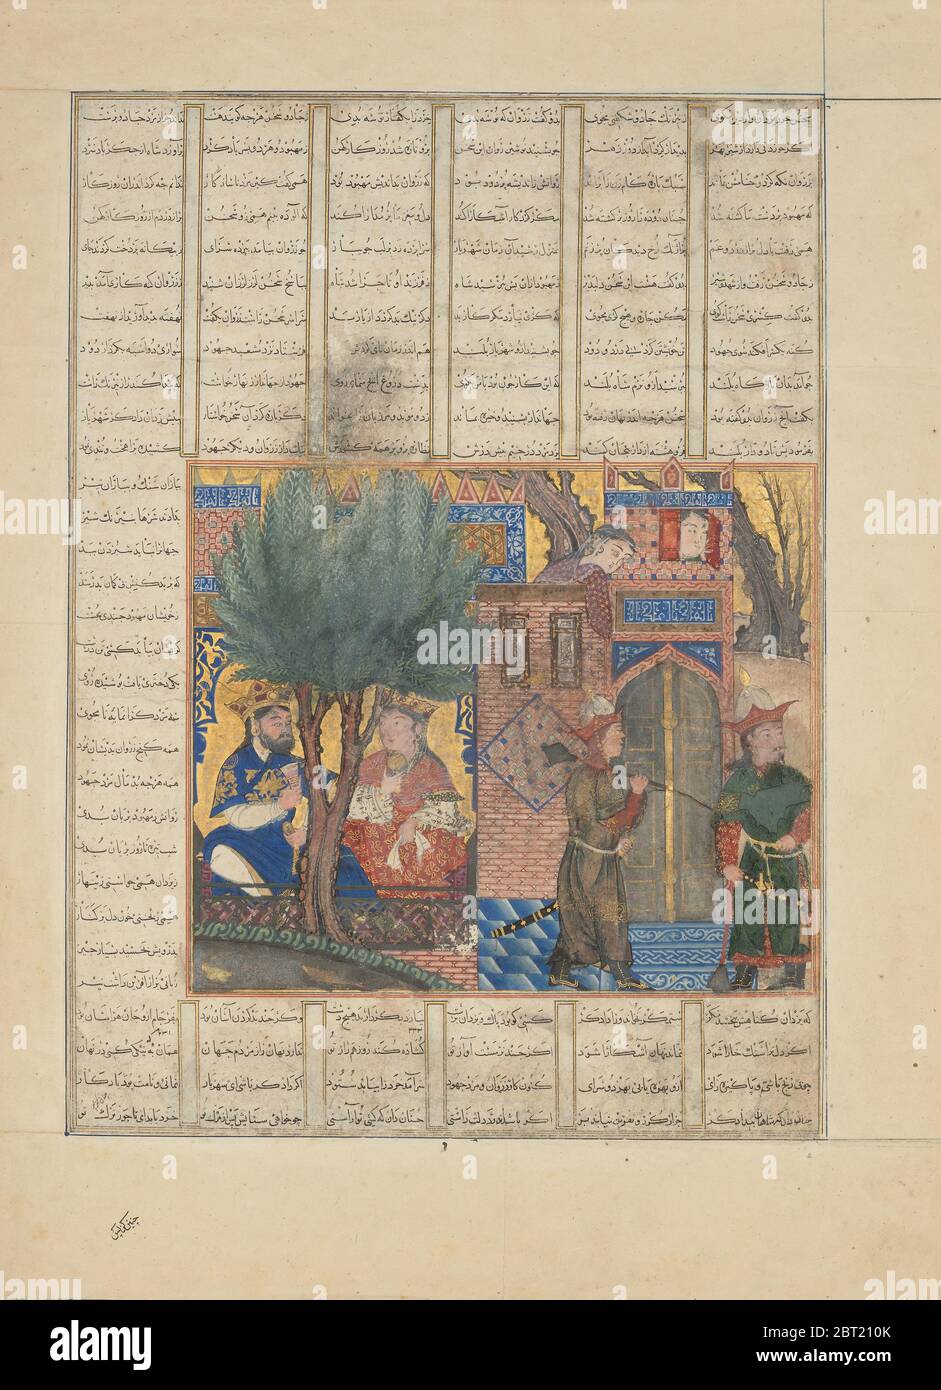 Nushirvan Eating Food Brought by the Sons of Mahbud, Folio from a Shahnama (Book of Kings), 1330s. Stock Photo